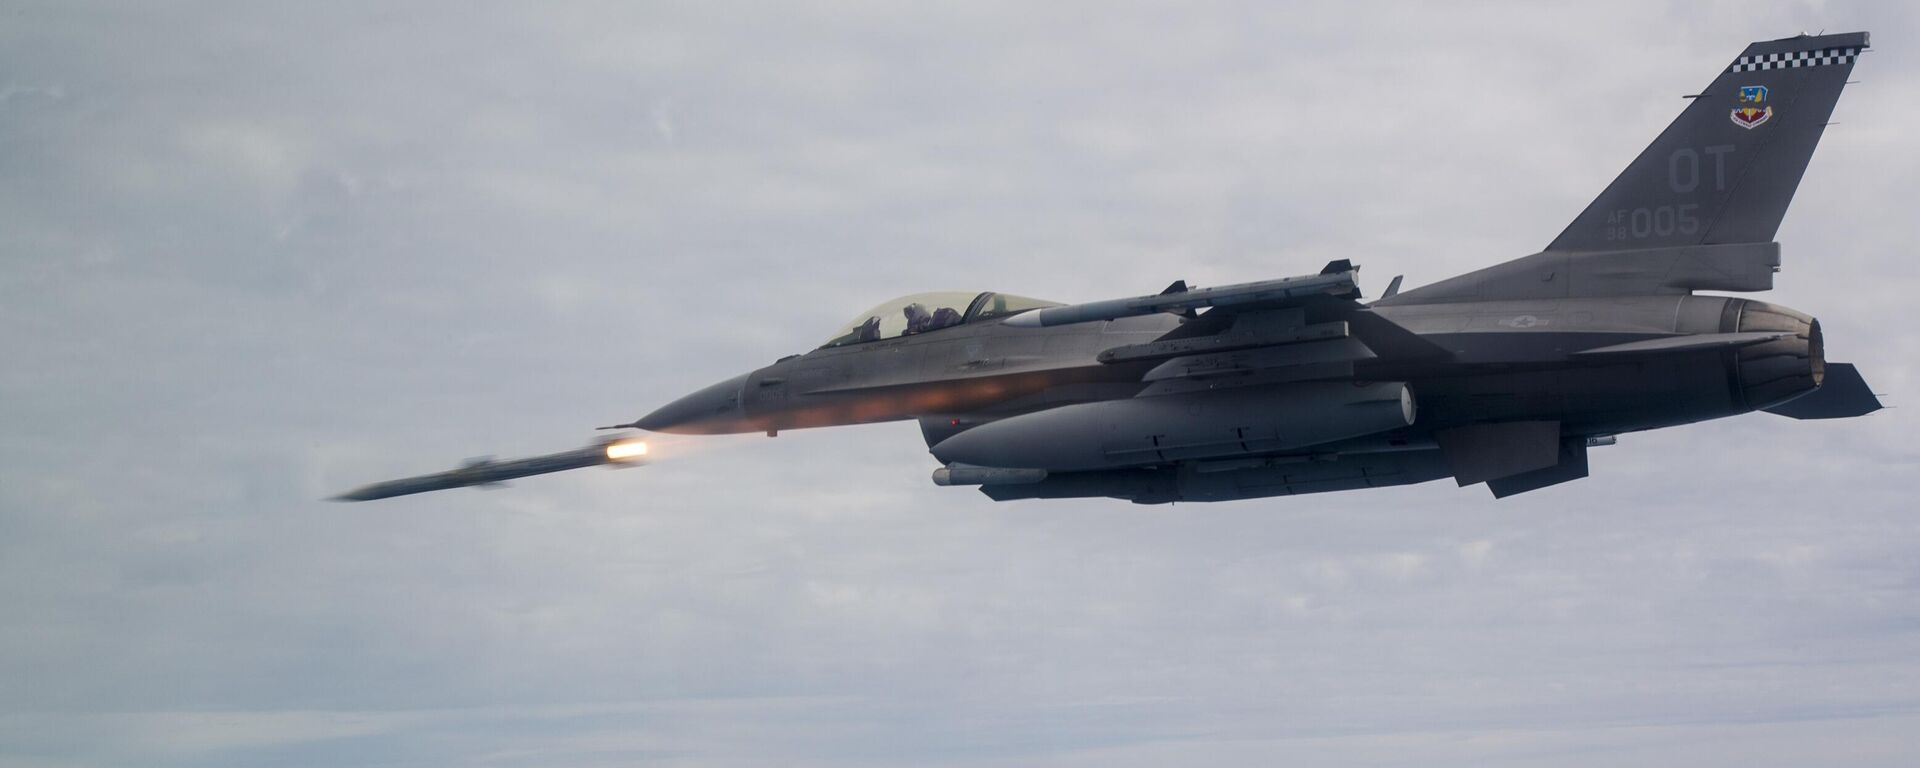 An F-16C Fighting Falcon assigned to the 85th Test Evaluation Squadron shoots an AIM-120 Advanced Medium-Range Air-to-Air Missile, or AMRAAM over testing ranges near Eglin Air Force Base, Fla., March 19, 2019. - Sputnik International, 1920, 12.07.2023